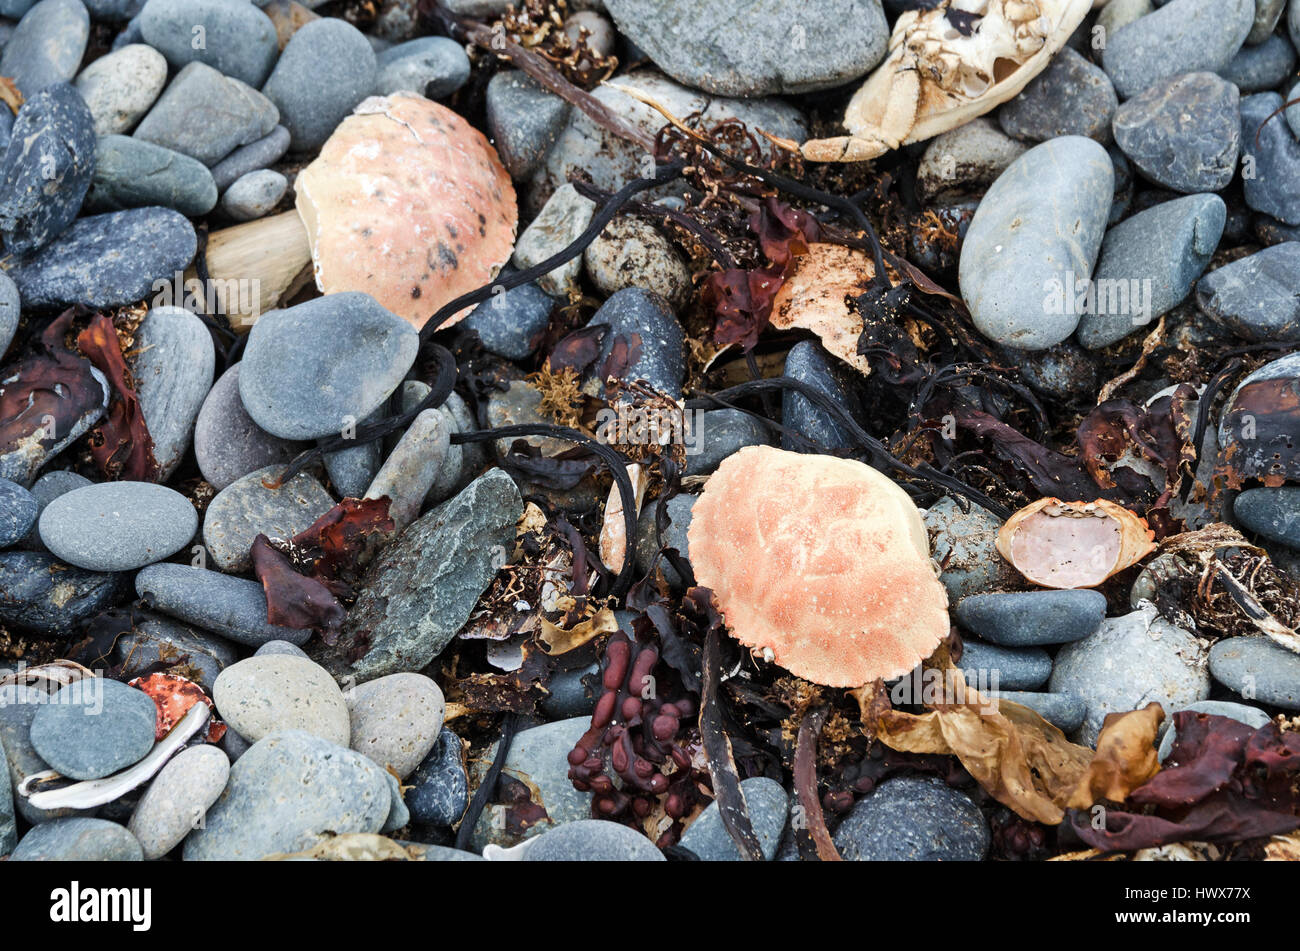 Crab shells and kelp holdfasts washed up on Gilley Beach, Islesford, Maine Stock Photo